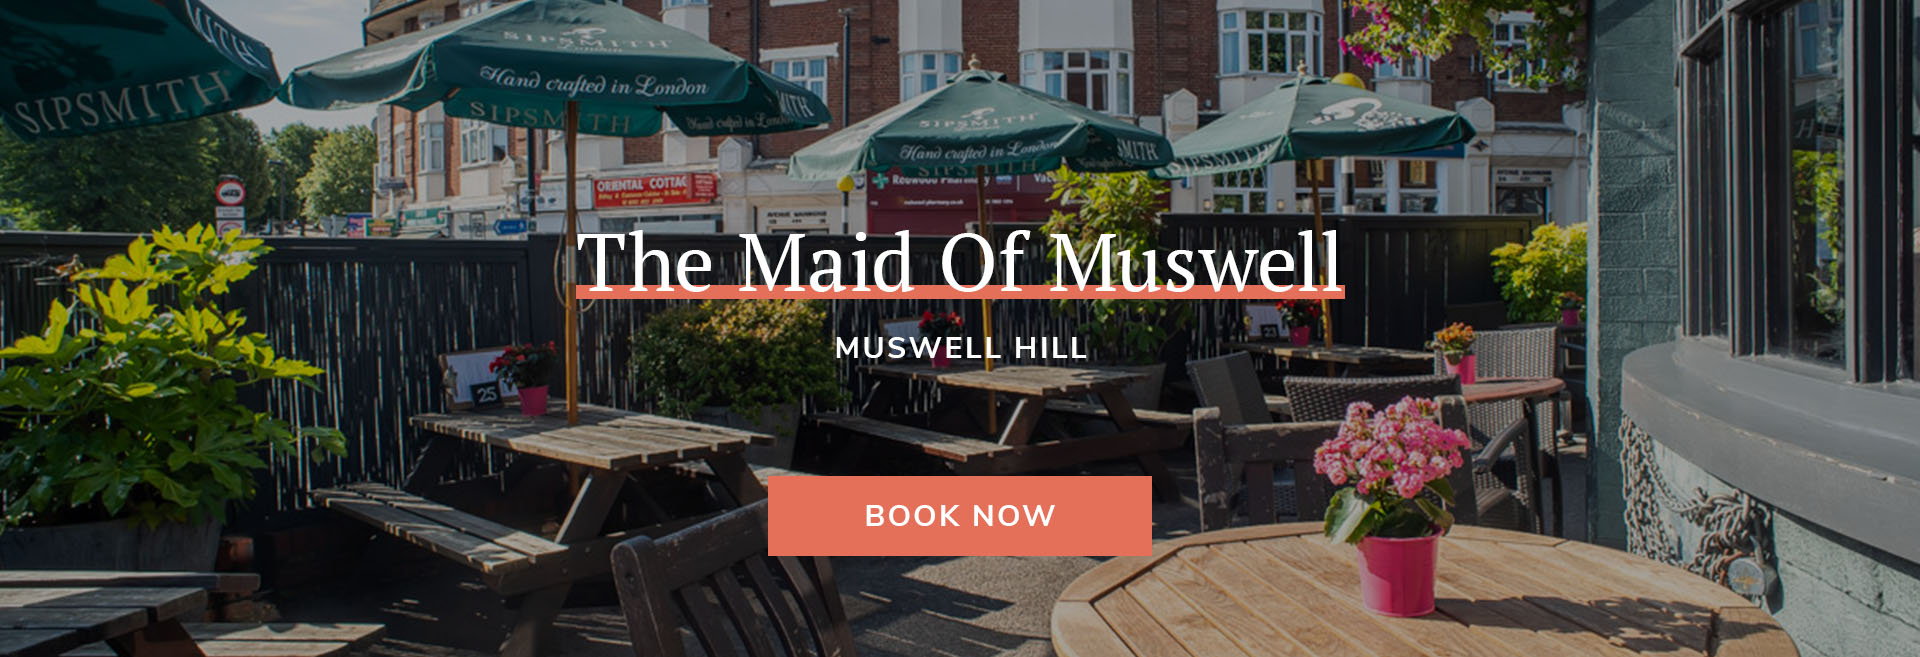 The Maid Of Muswell Banner 3